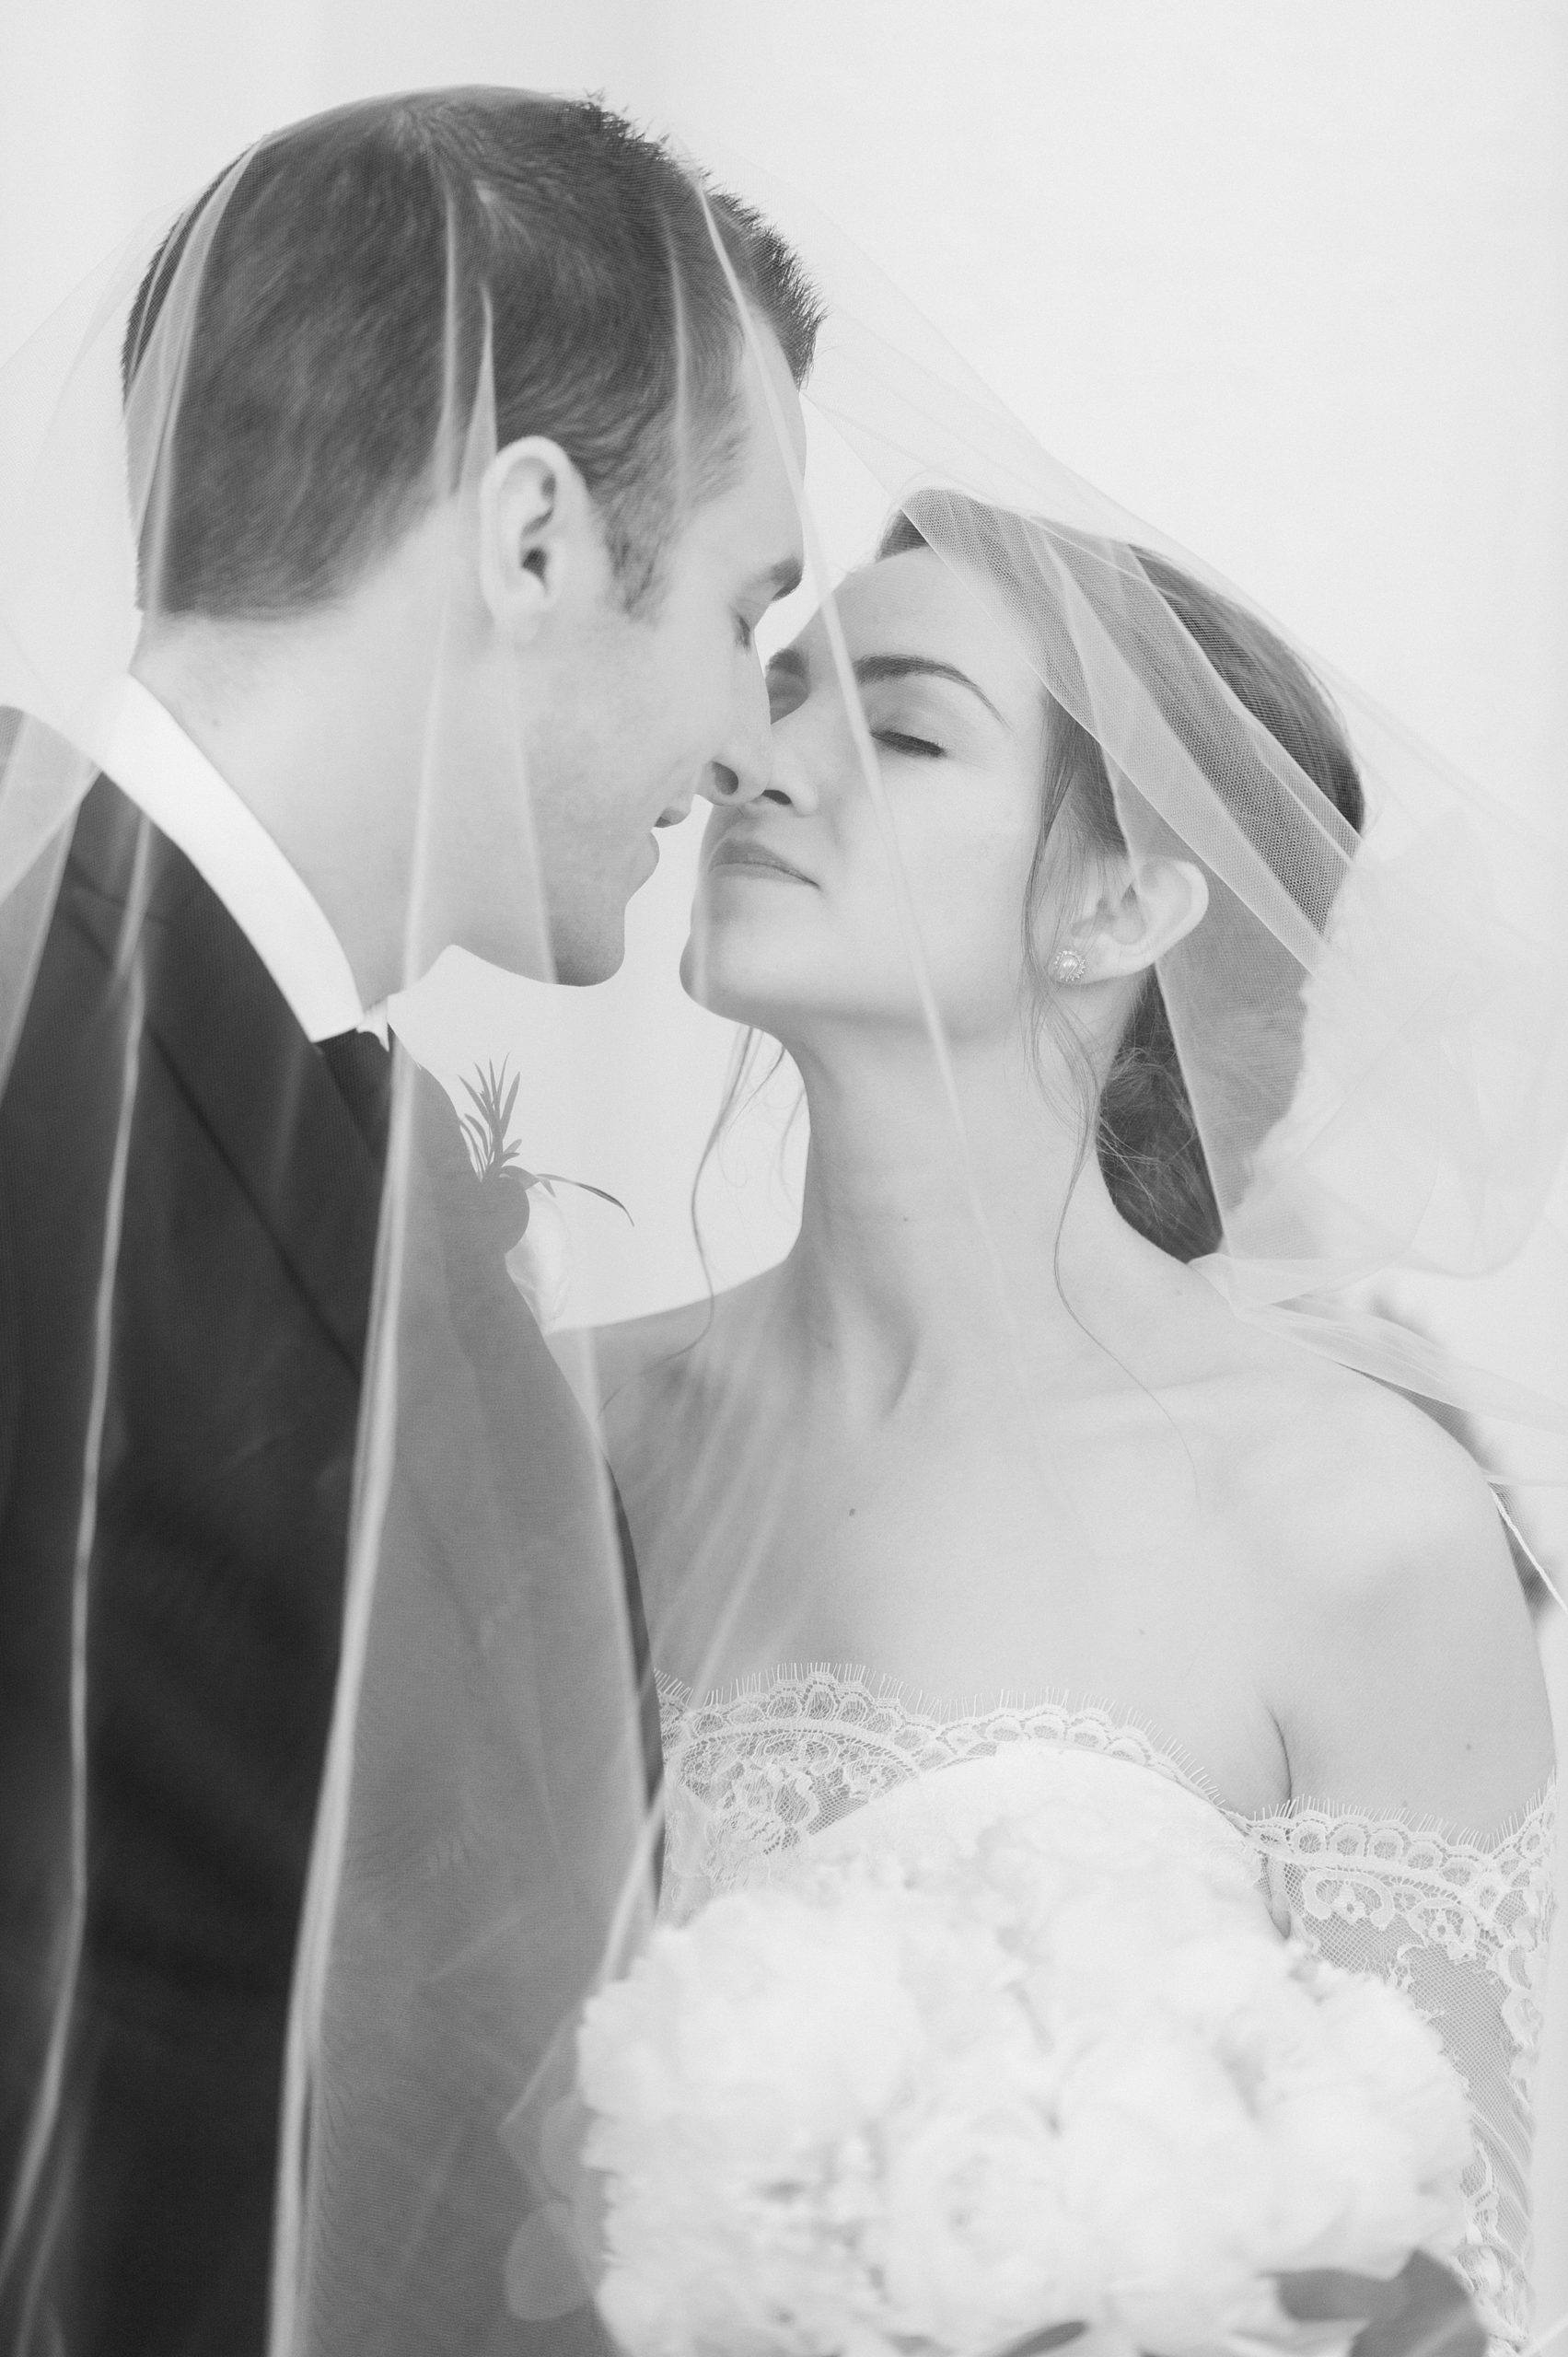 classic black and white portrait of bride and groom under veil